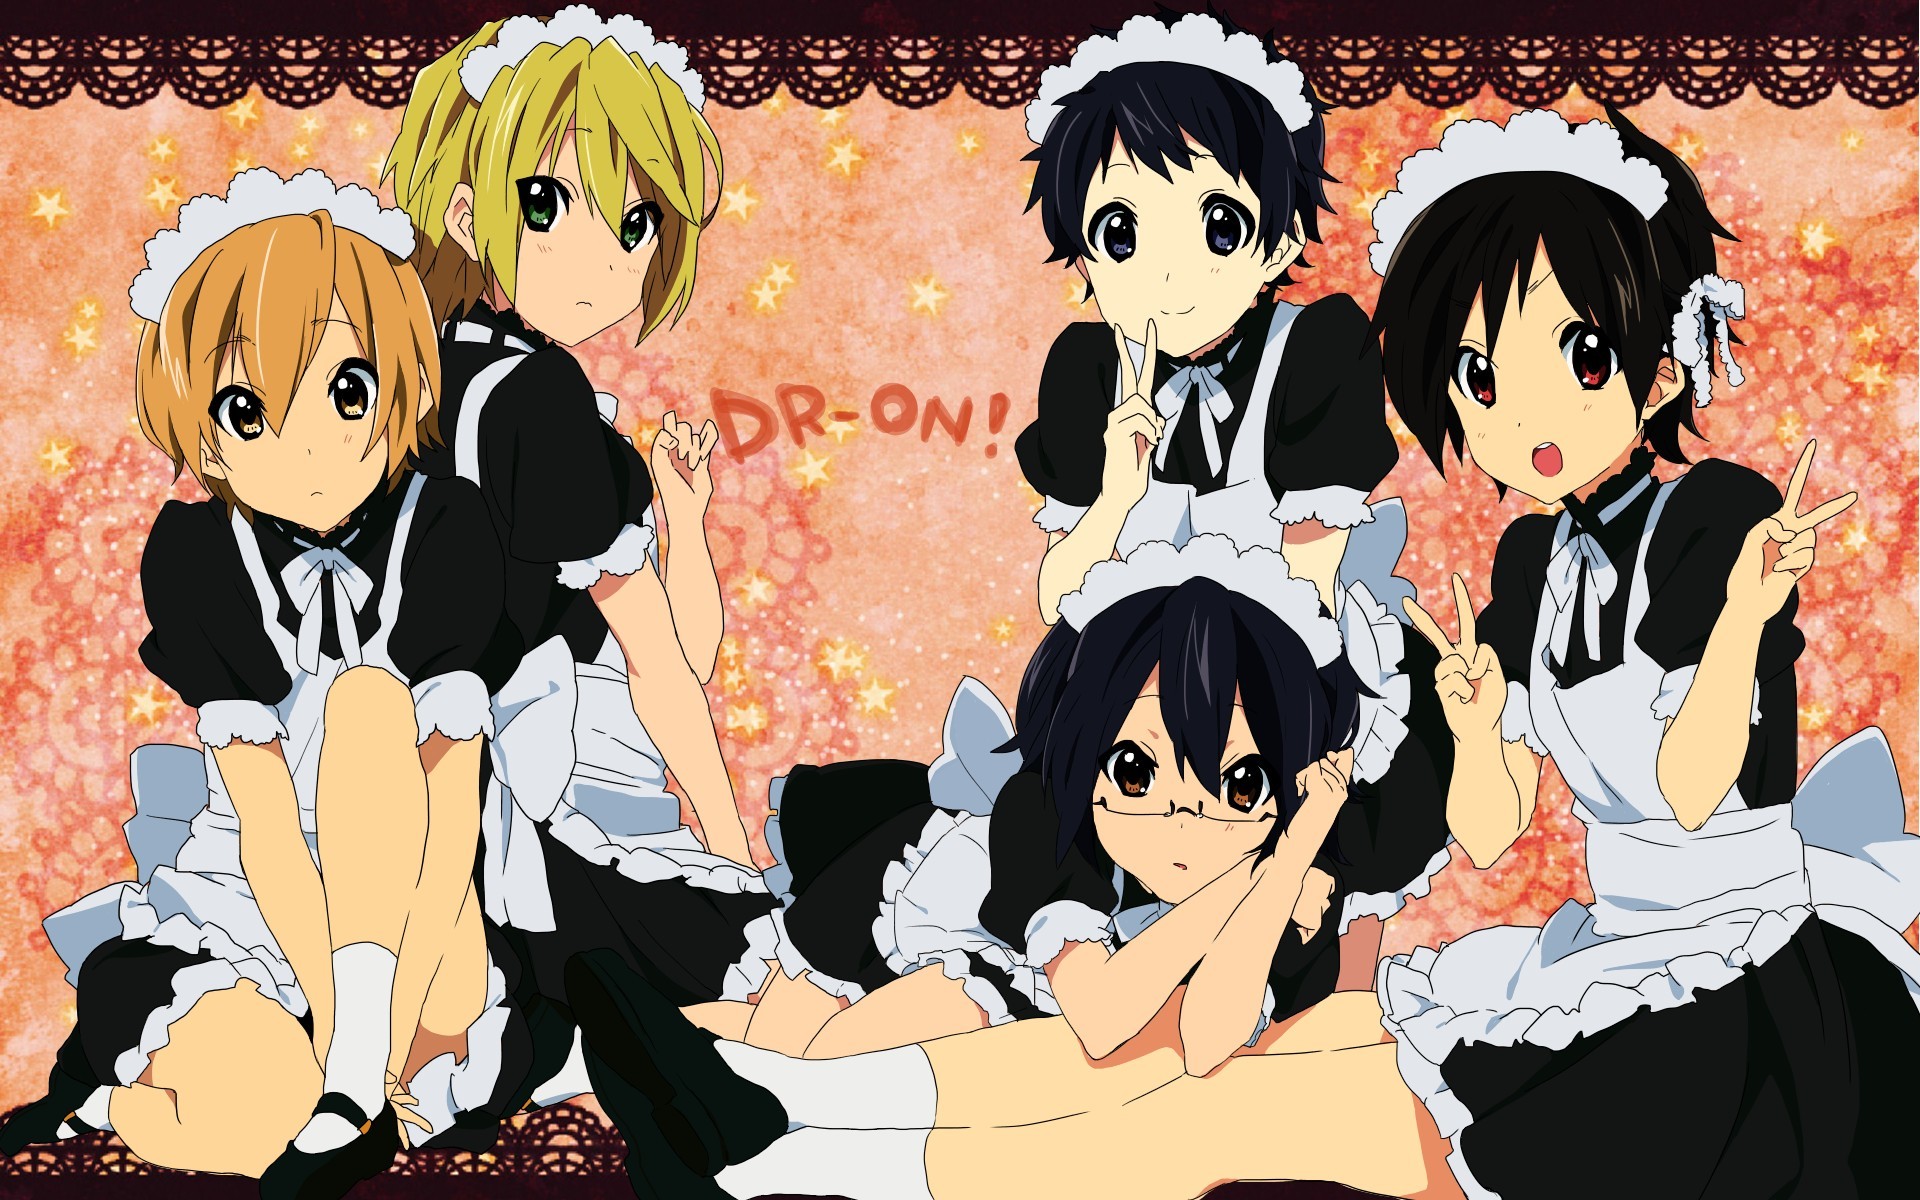 1920x1200 mintymidget210 images Dudes in Maid Outfits FTW! B3 HD wallpaper and  background photos